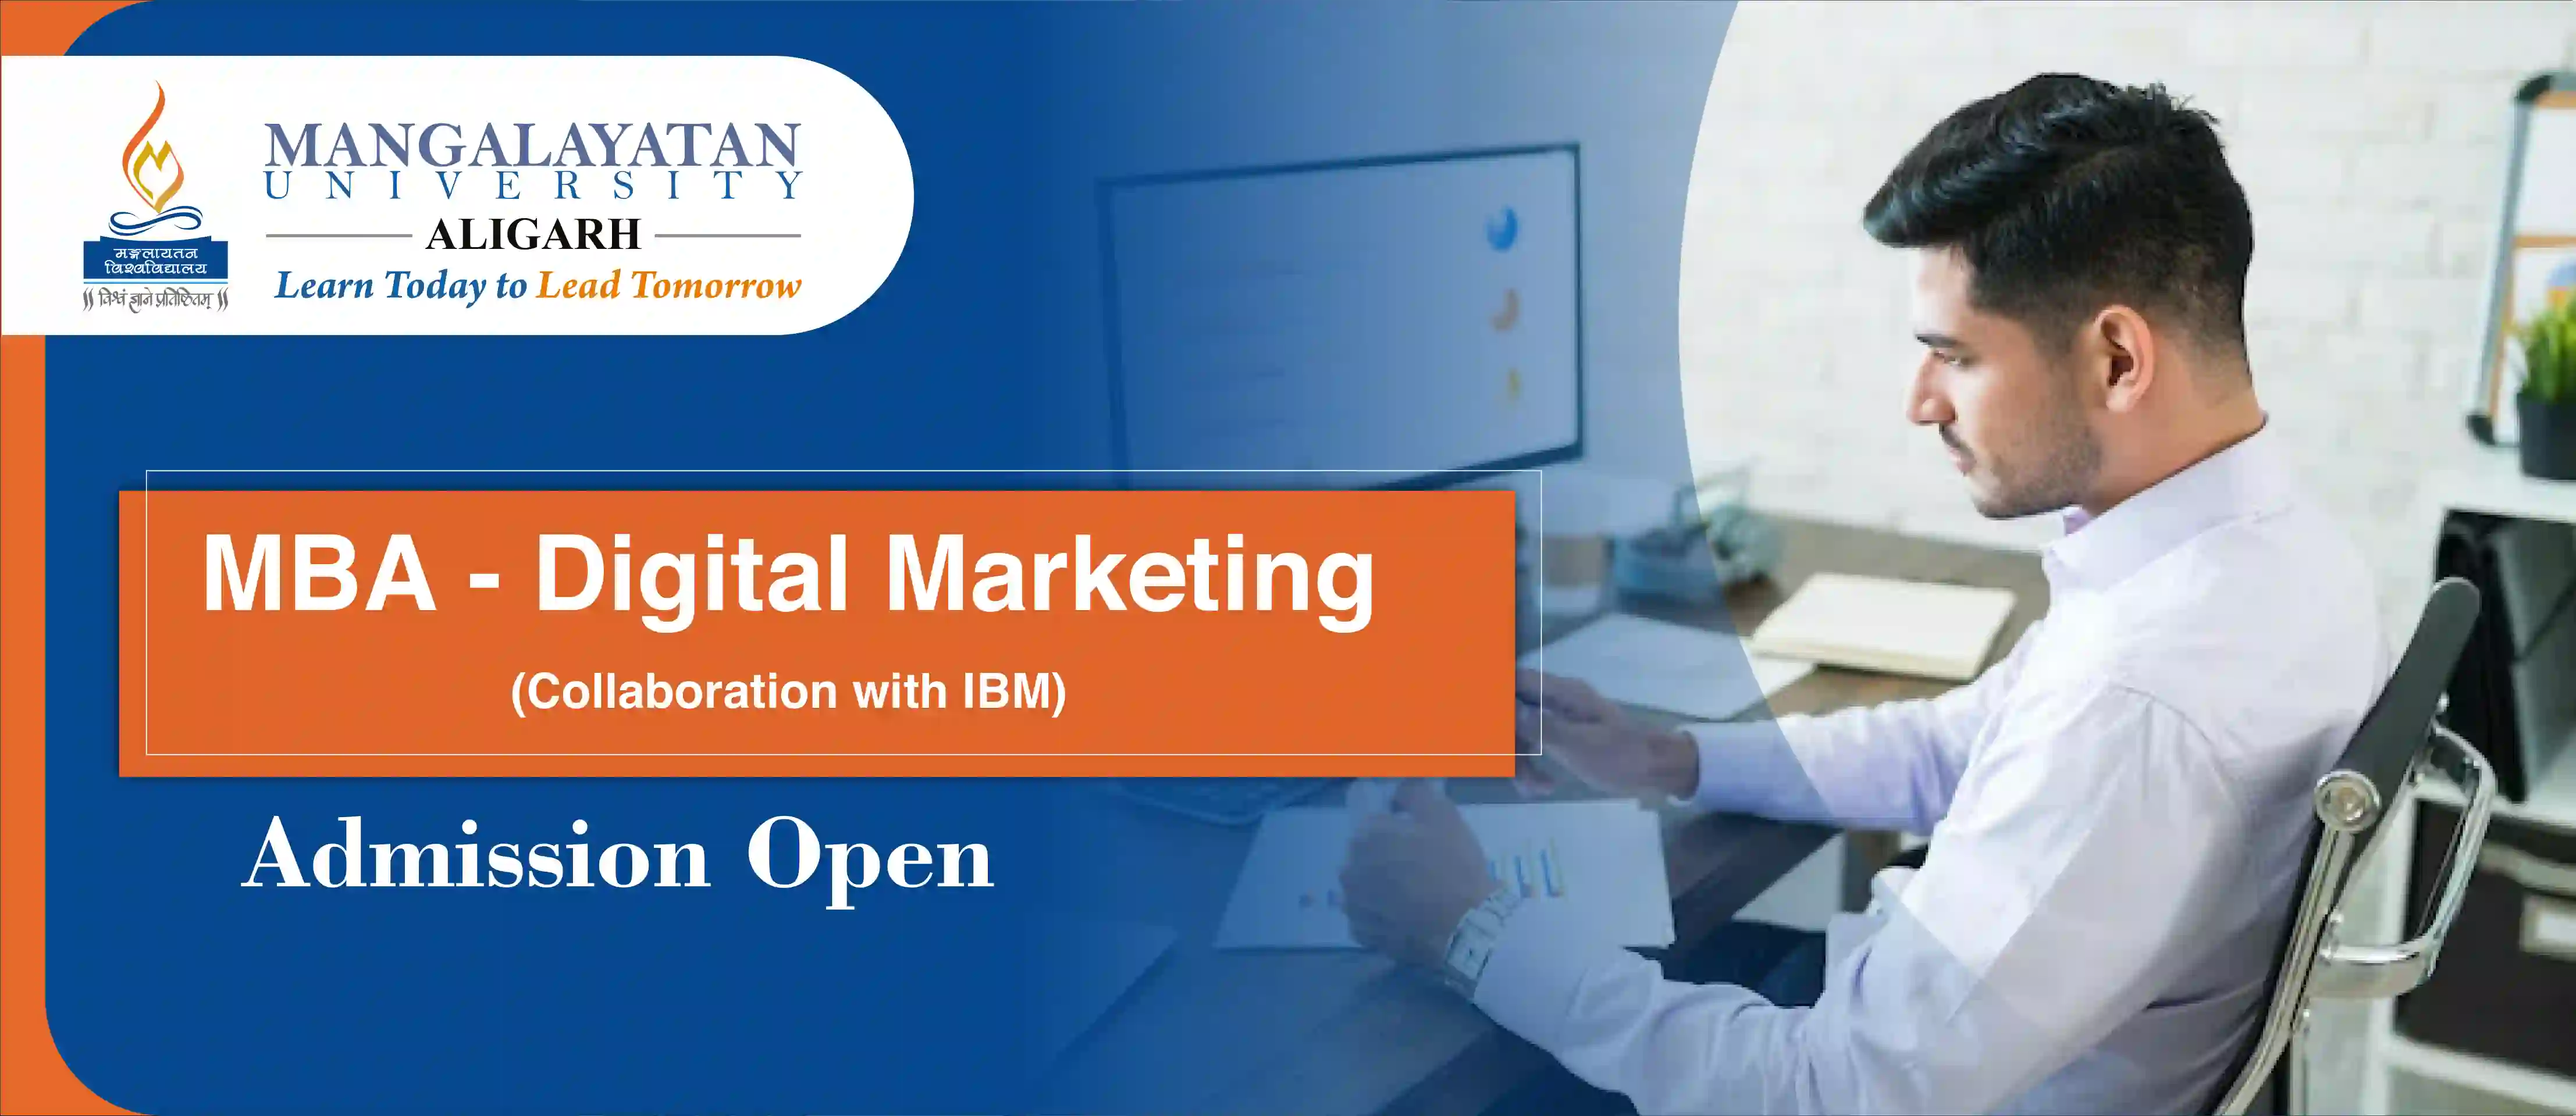 MBA Digital Marketing (Collaboration with IBM) Course Admission